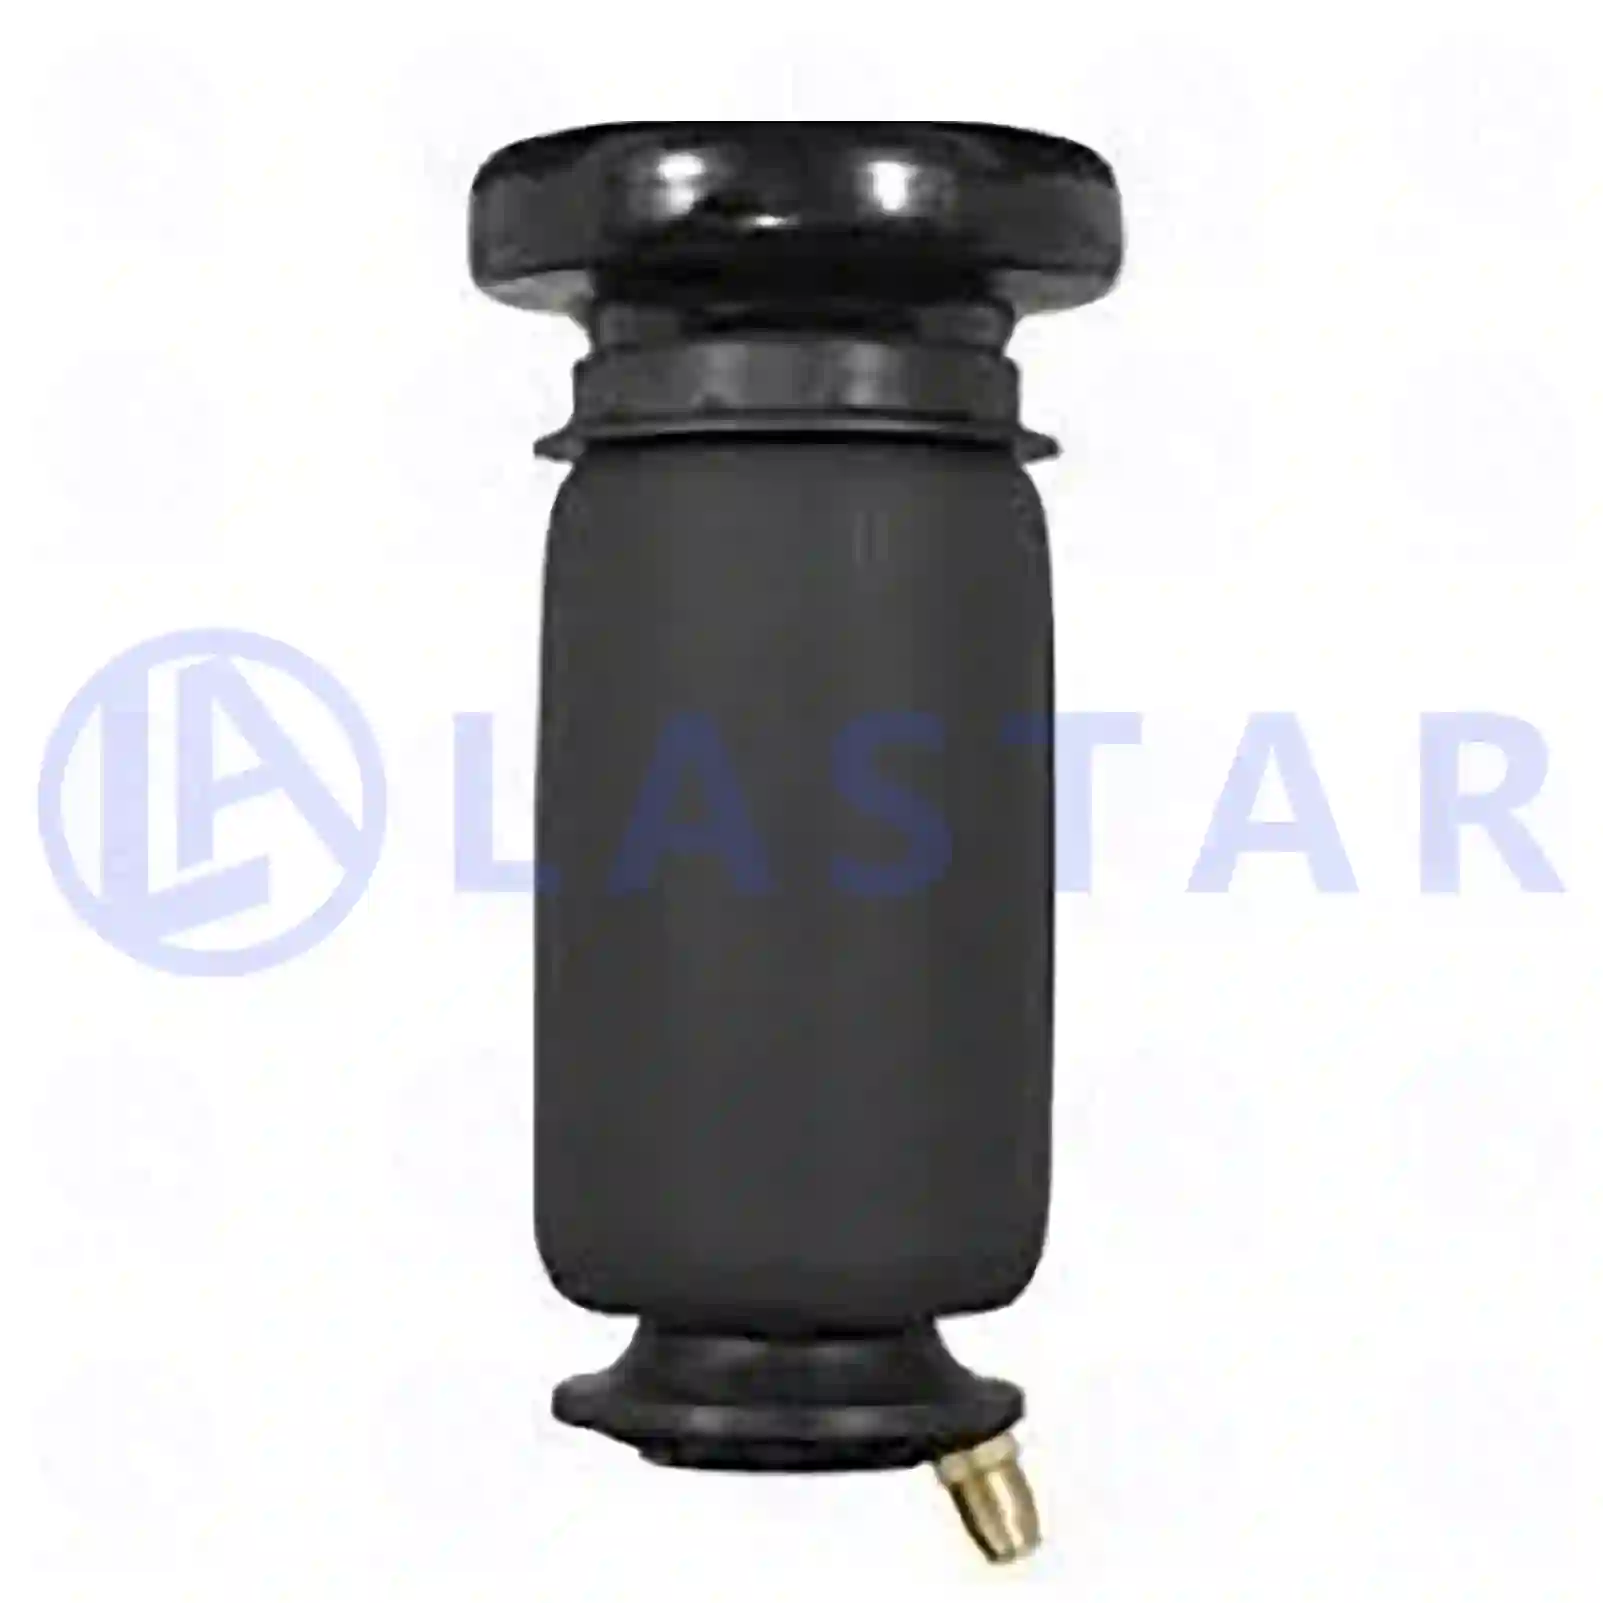 Air bellow, cabin shock absorber, 77735185, 1349840, ZG40691-0008 ||  77735185 Lastar Spare Part | Truck Spare Parts, Auotomotive Spare Parts Air bellow, cabin shock absorber, 77735185, 1349840, ZG40691-0008 ||  77735185 Lastar Spare Part | Truck Spare Parts, Auotomotive Spare Parts